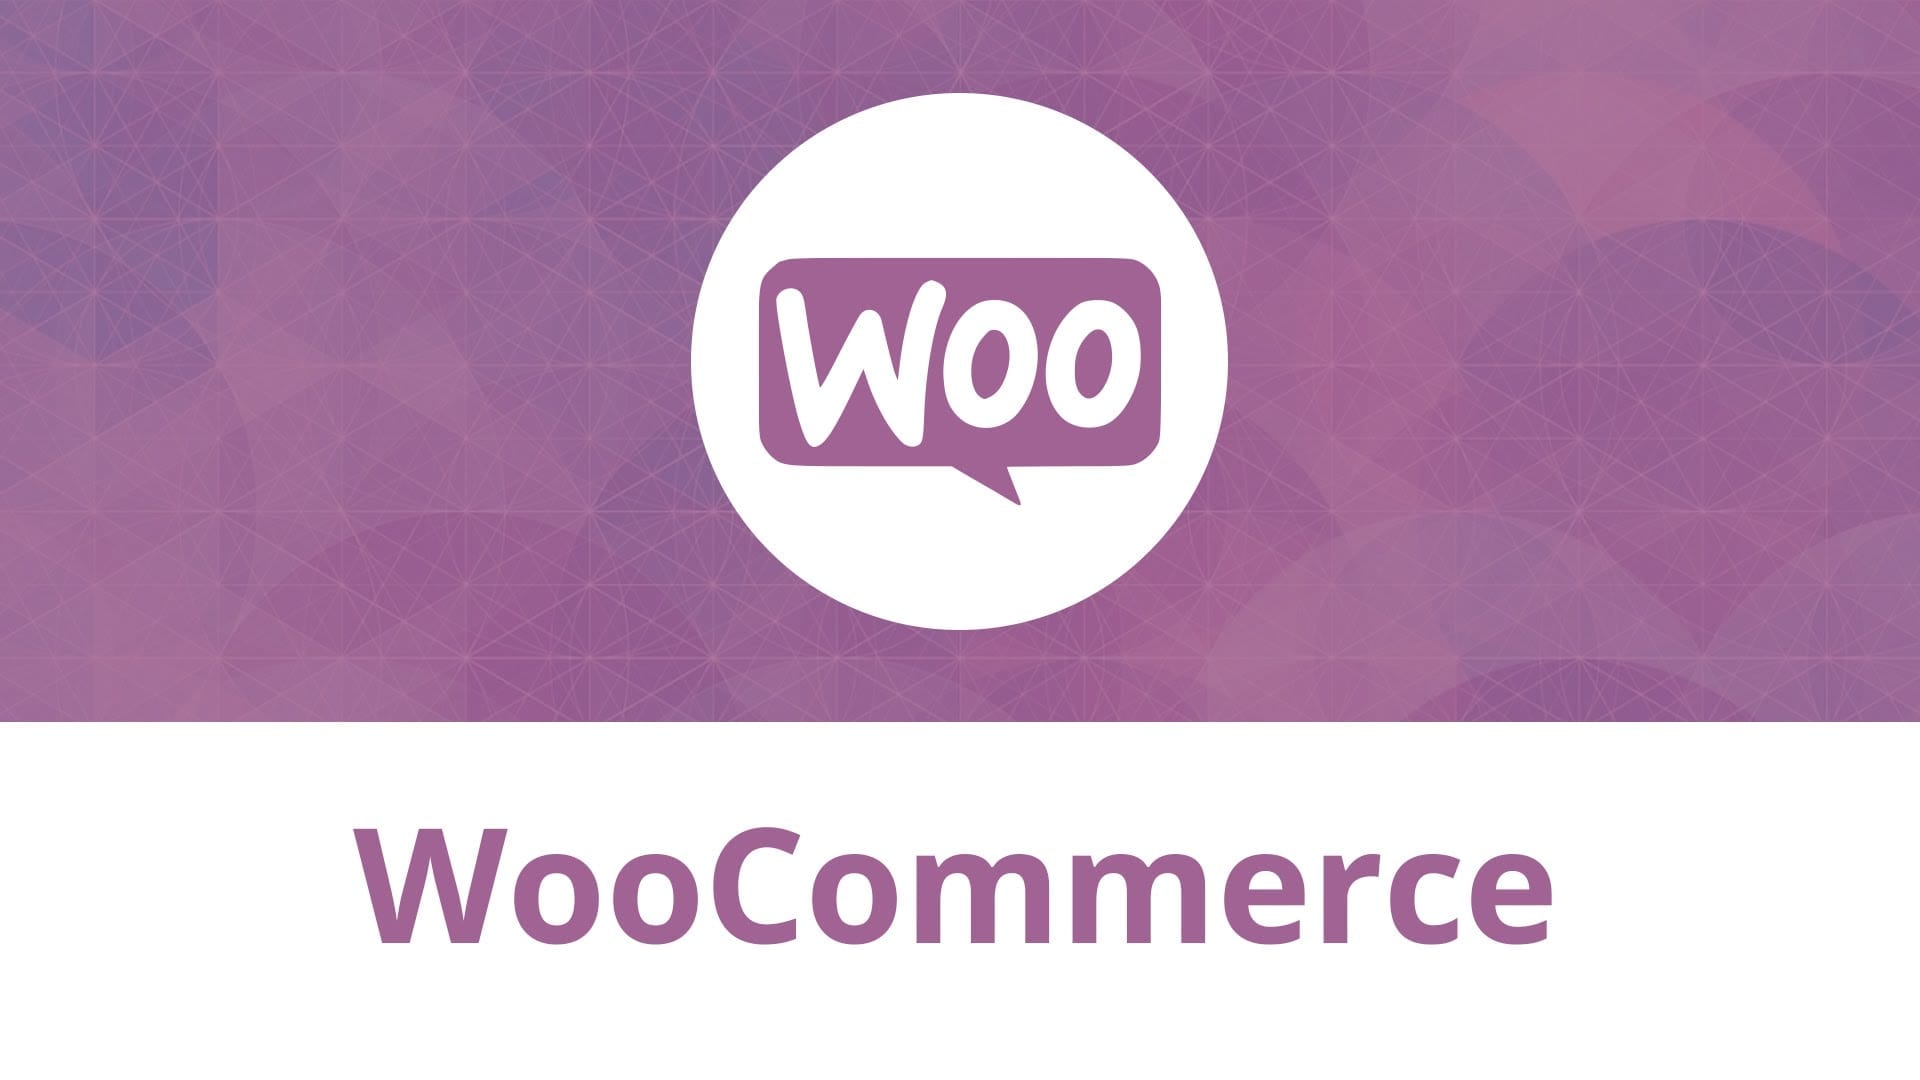 woocommerce-269-released-improves-compatibility-with-wordpress-47.jpg